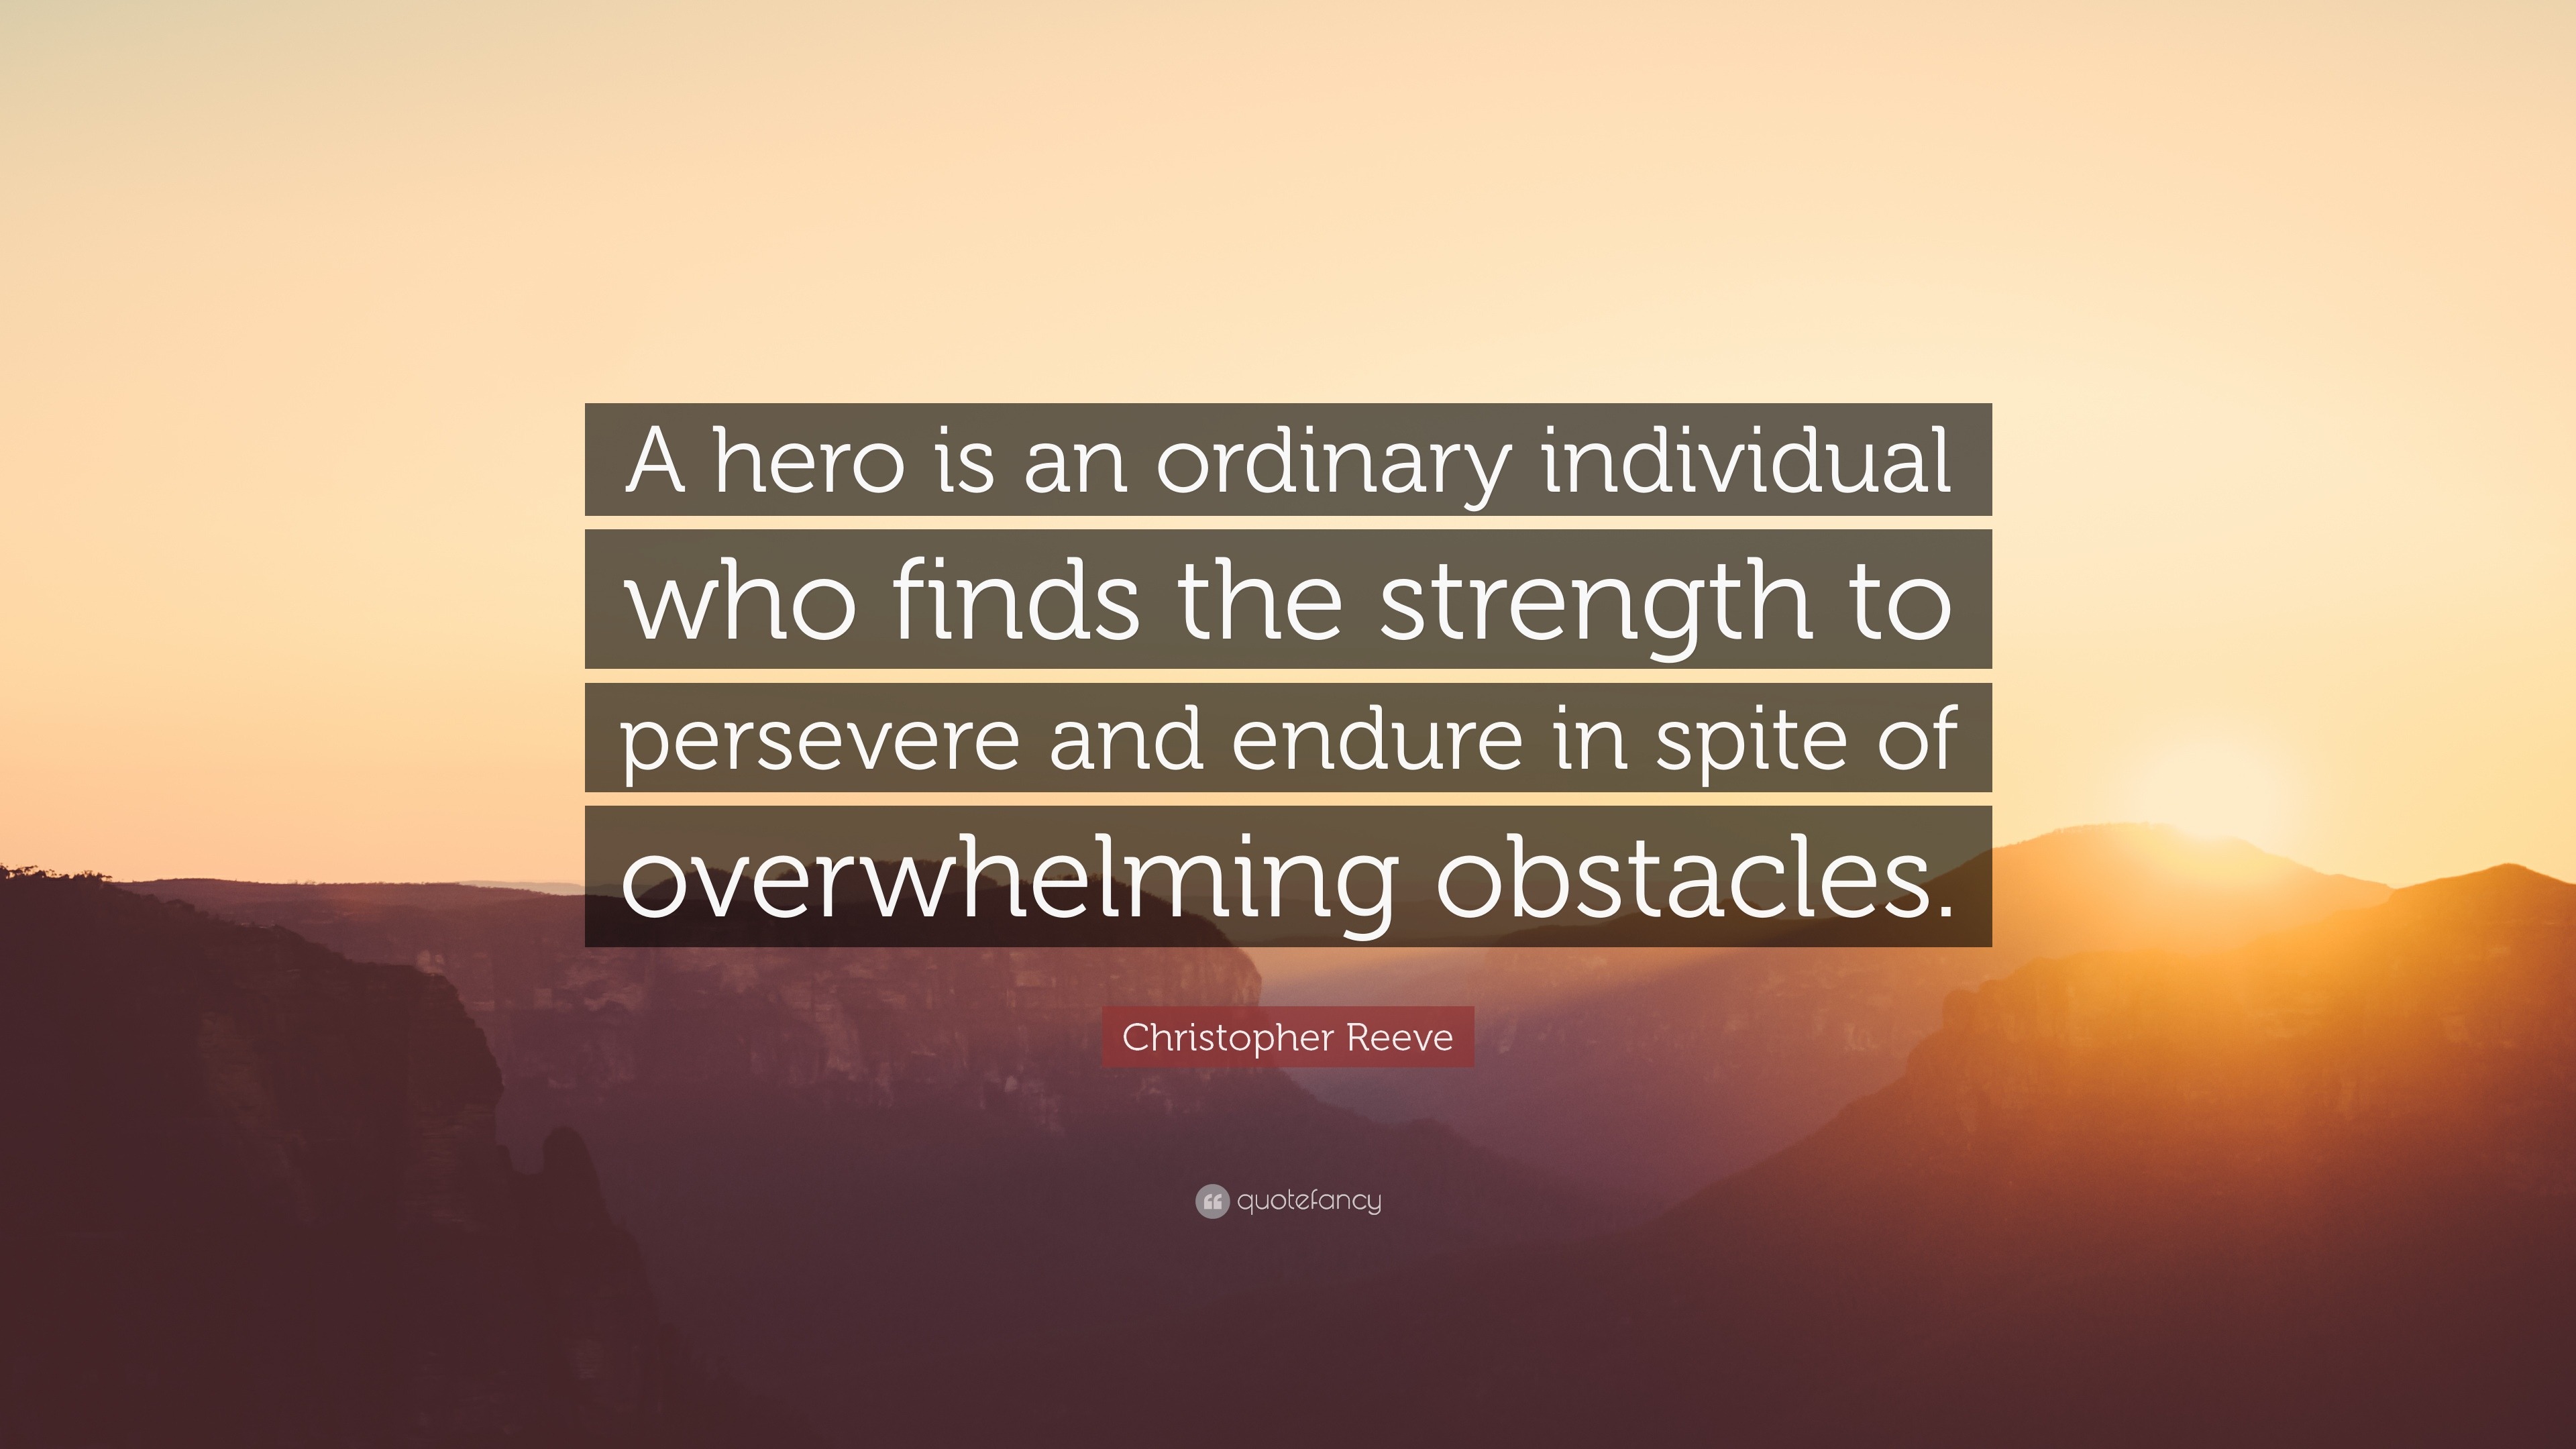 33092 Christopher Reeve Quote A hero is an ordinary individual who finds